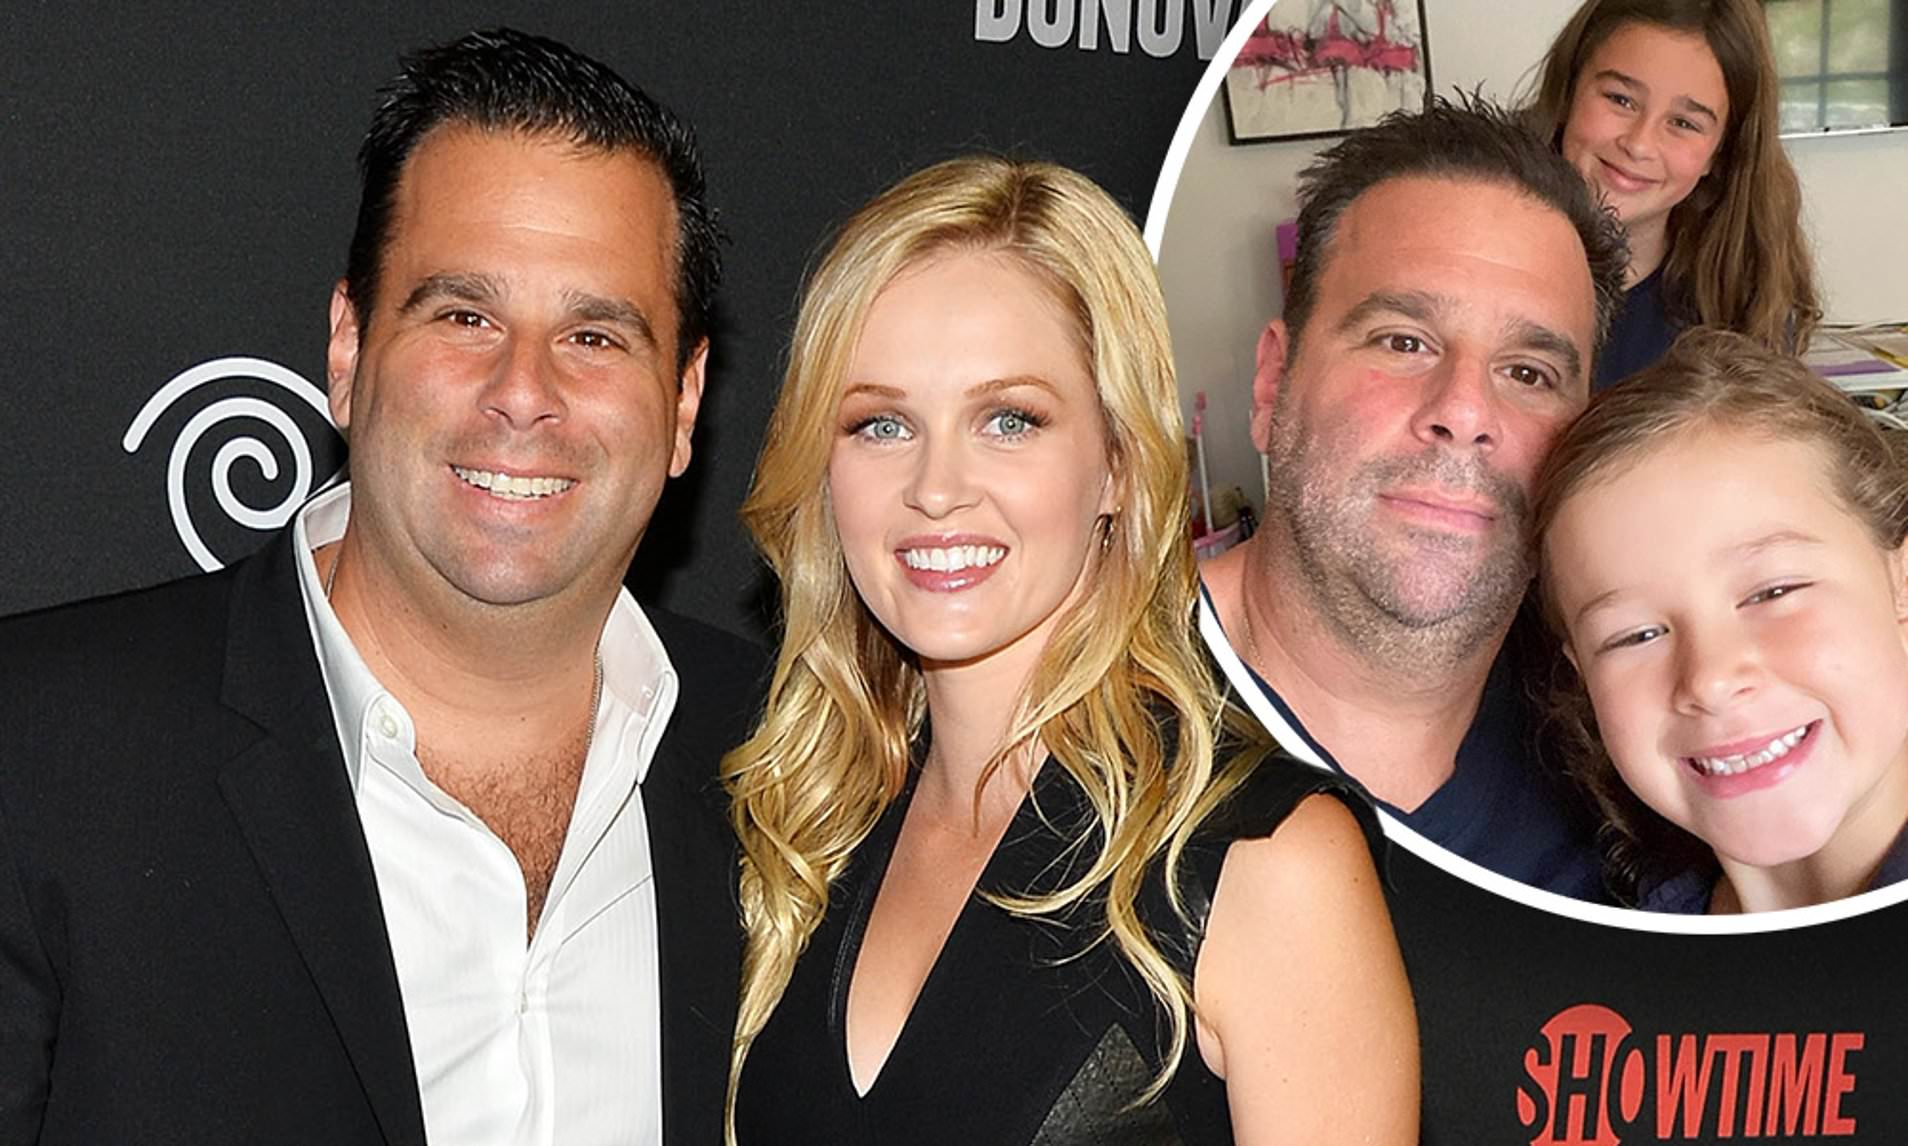 Randall Emmett filed to decrease child support payments to avoid bankruptcy